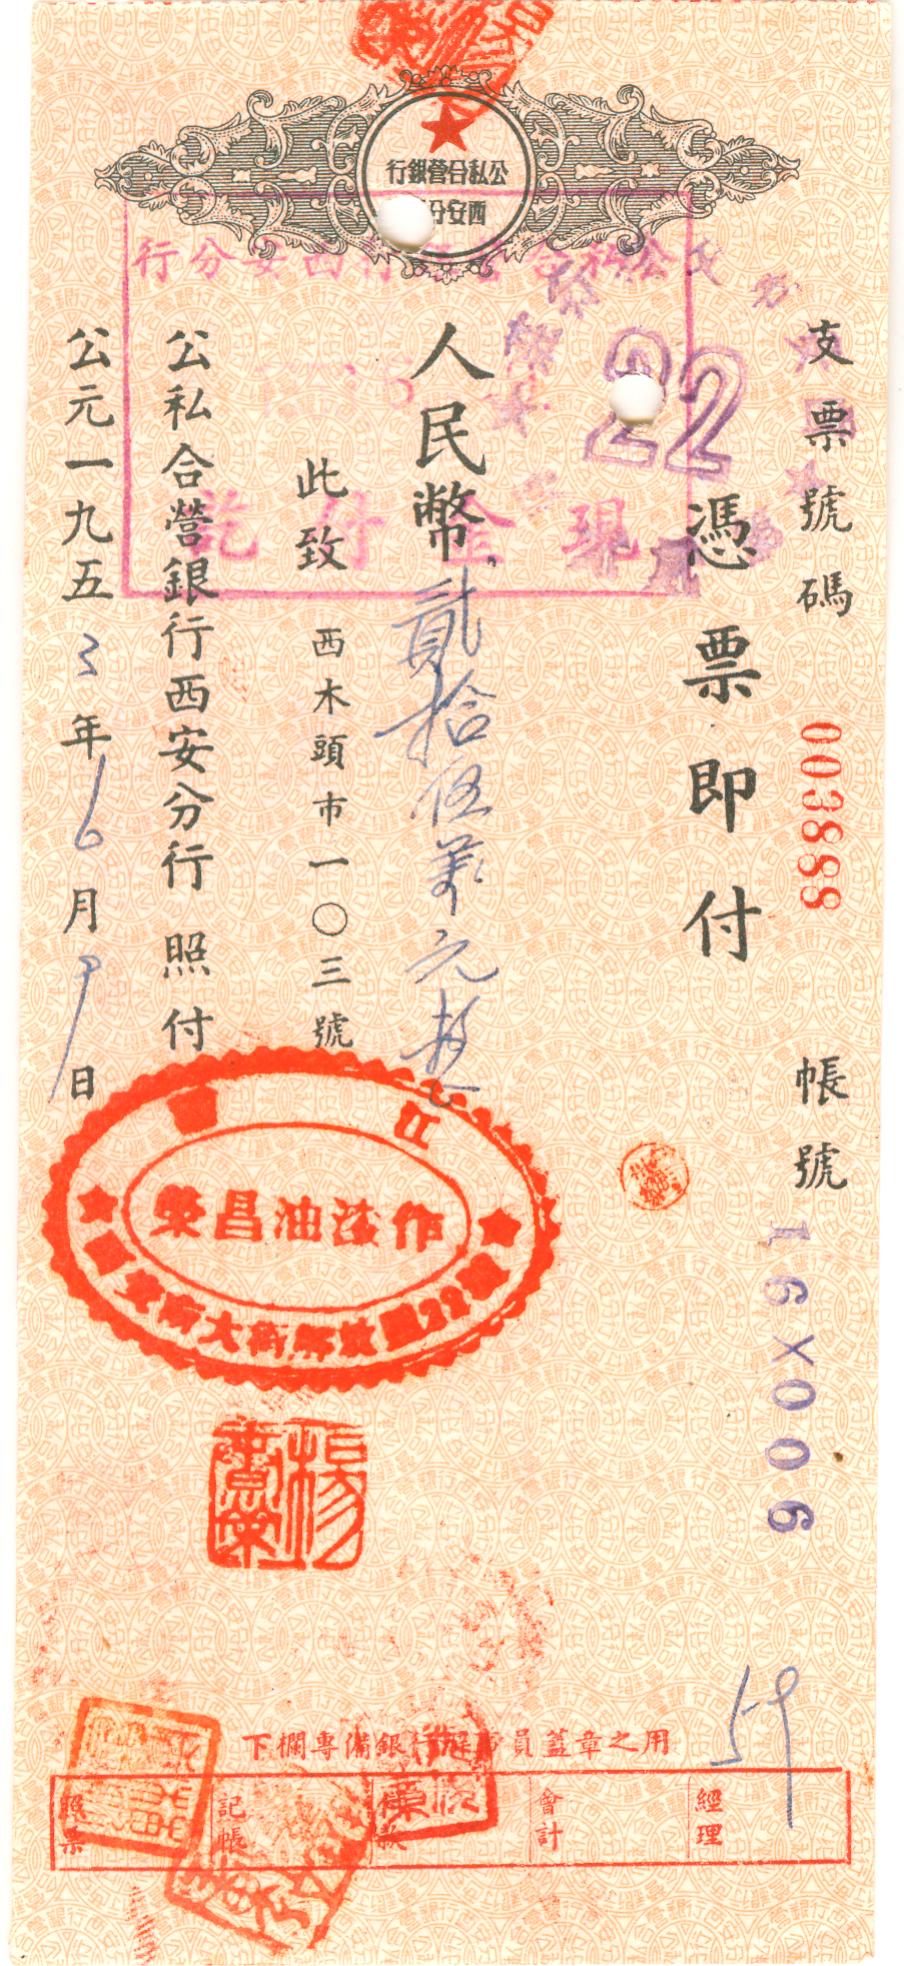 D1790, Check of Communist Xian City Bank, China, 1953 Cheque